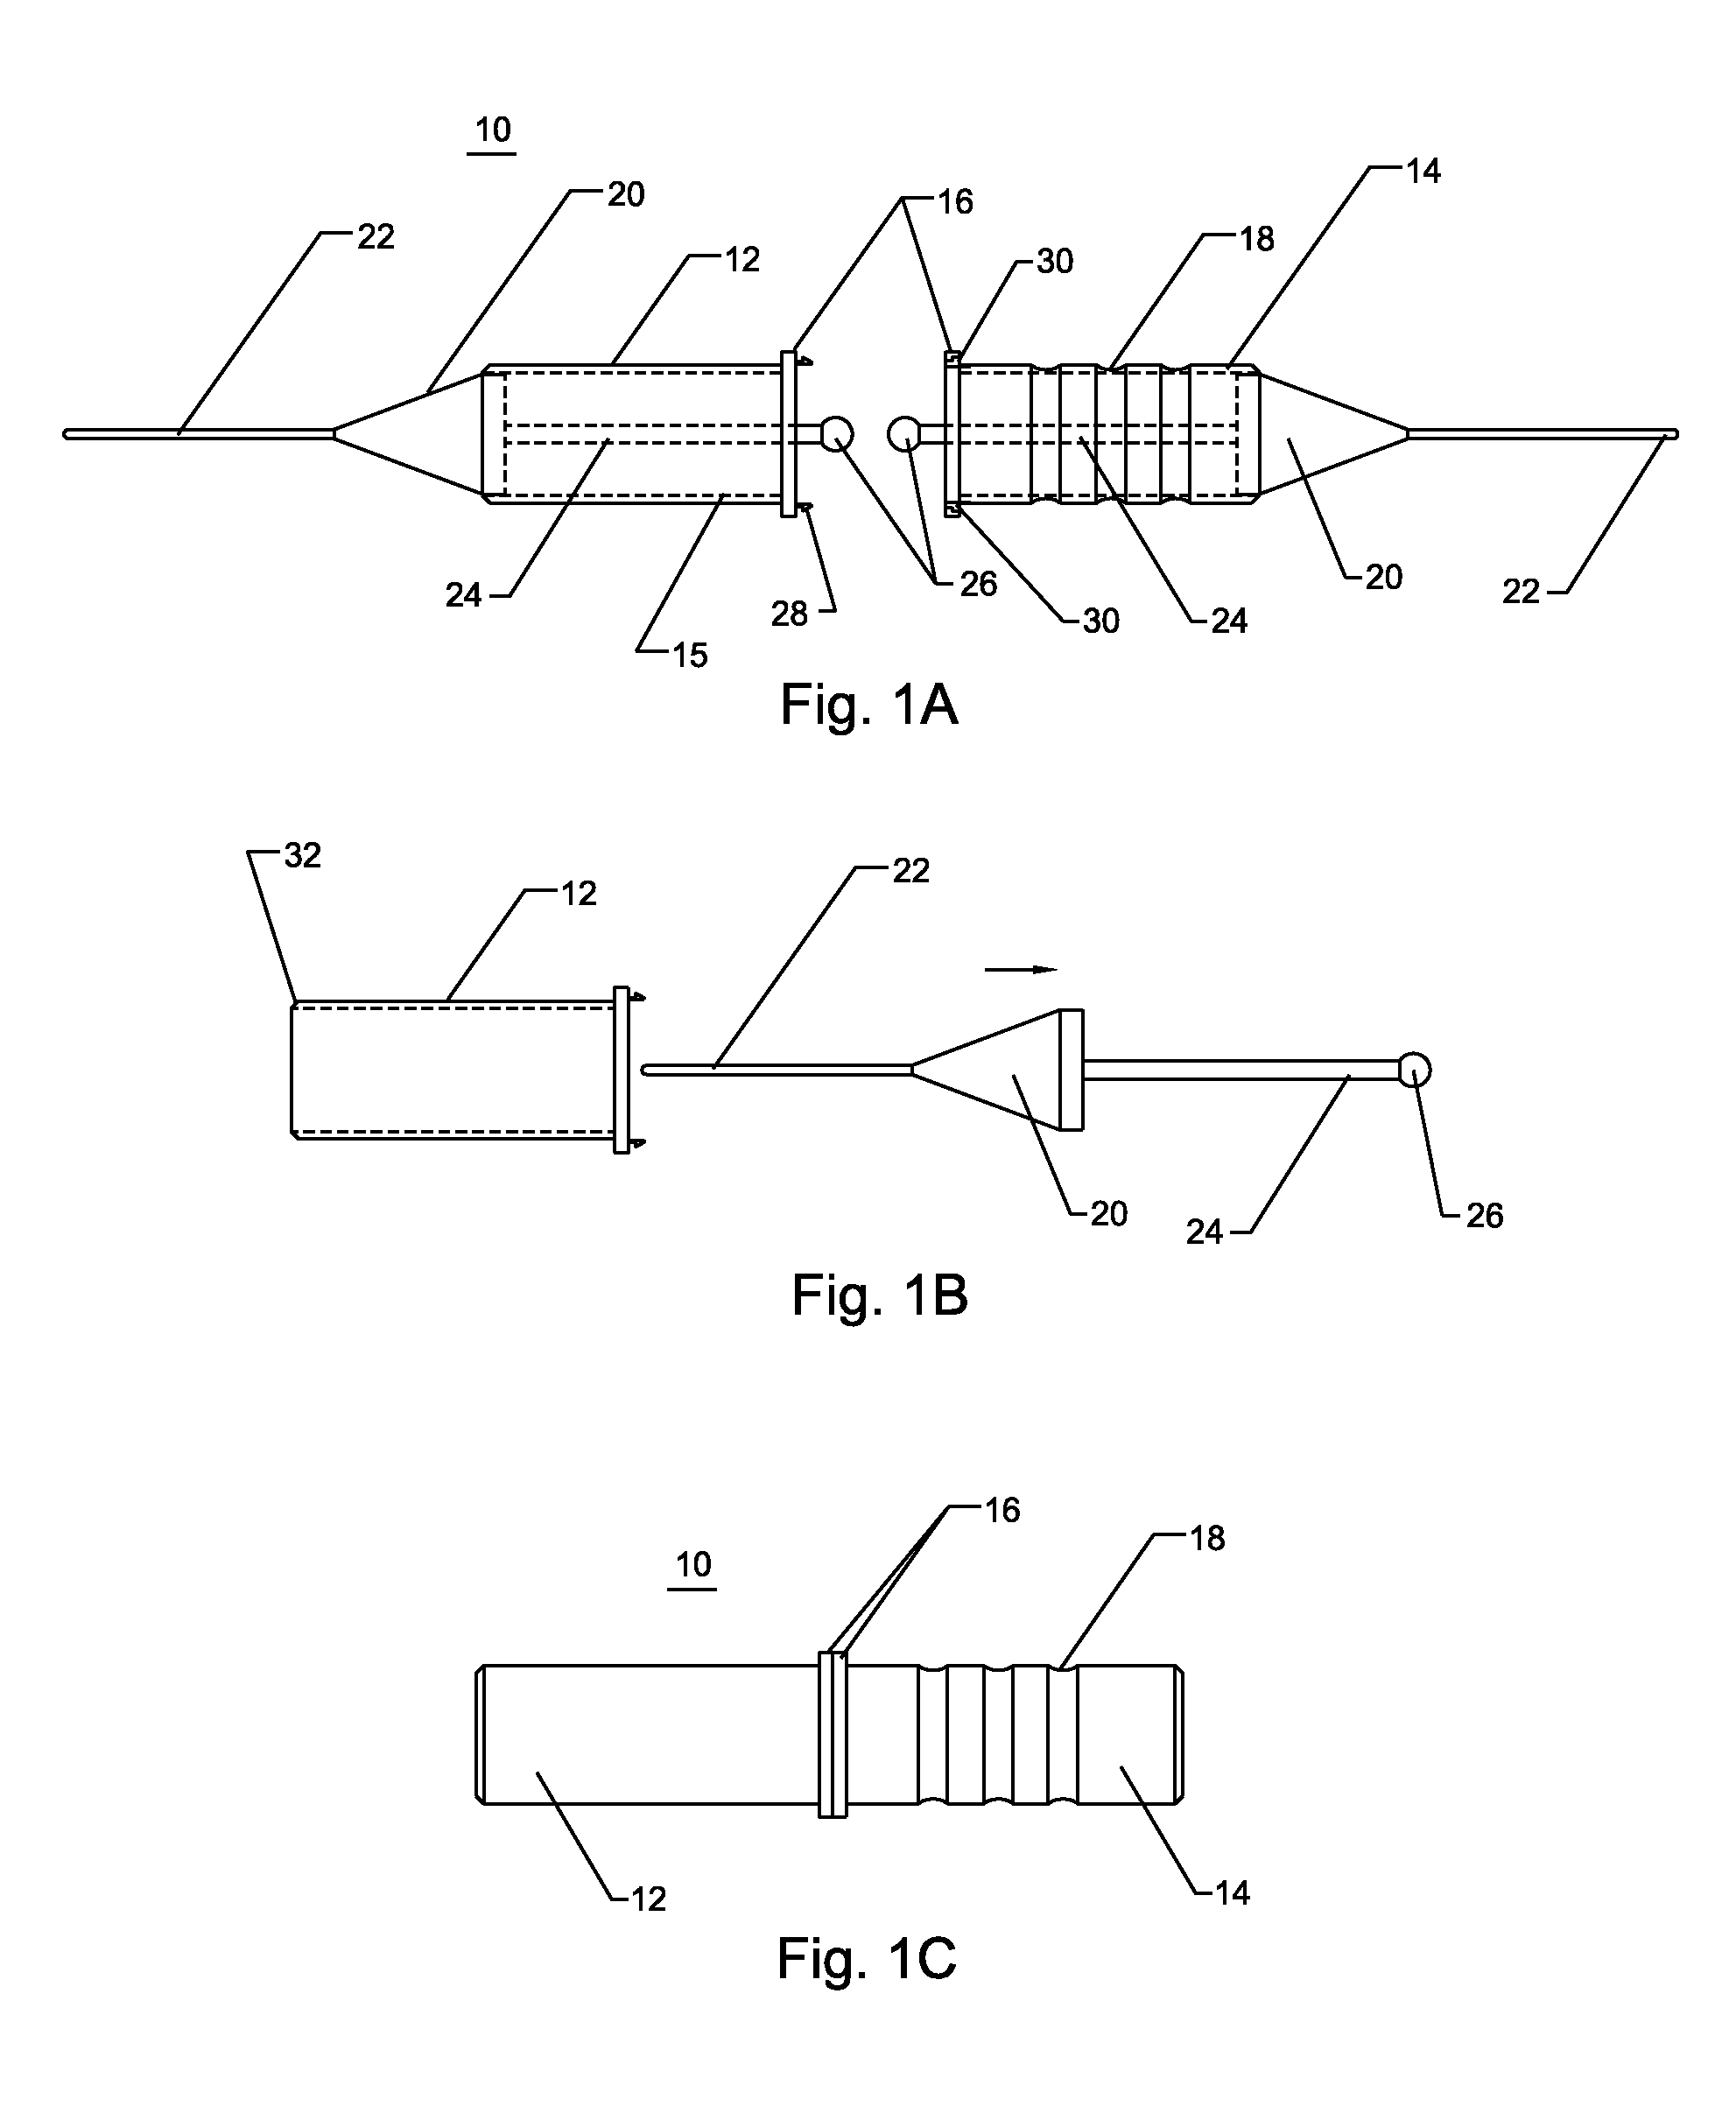 Method and device for temporary emergency vessel anastomoses